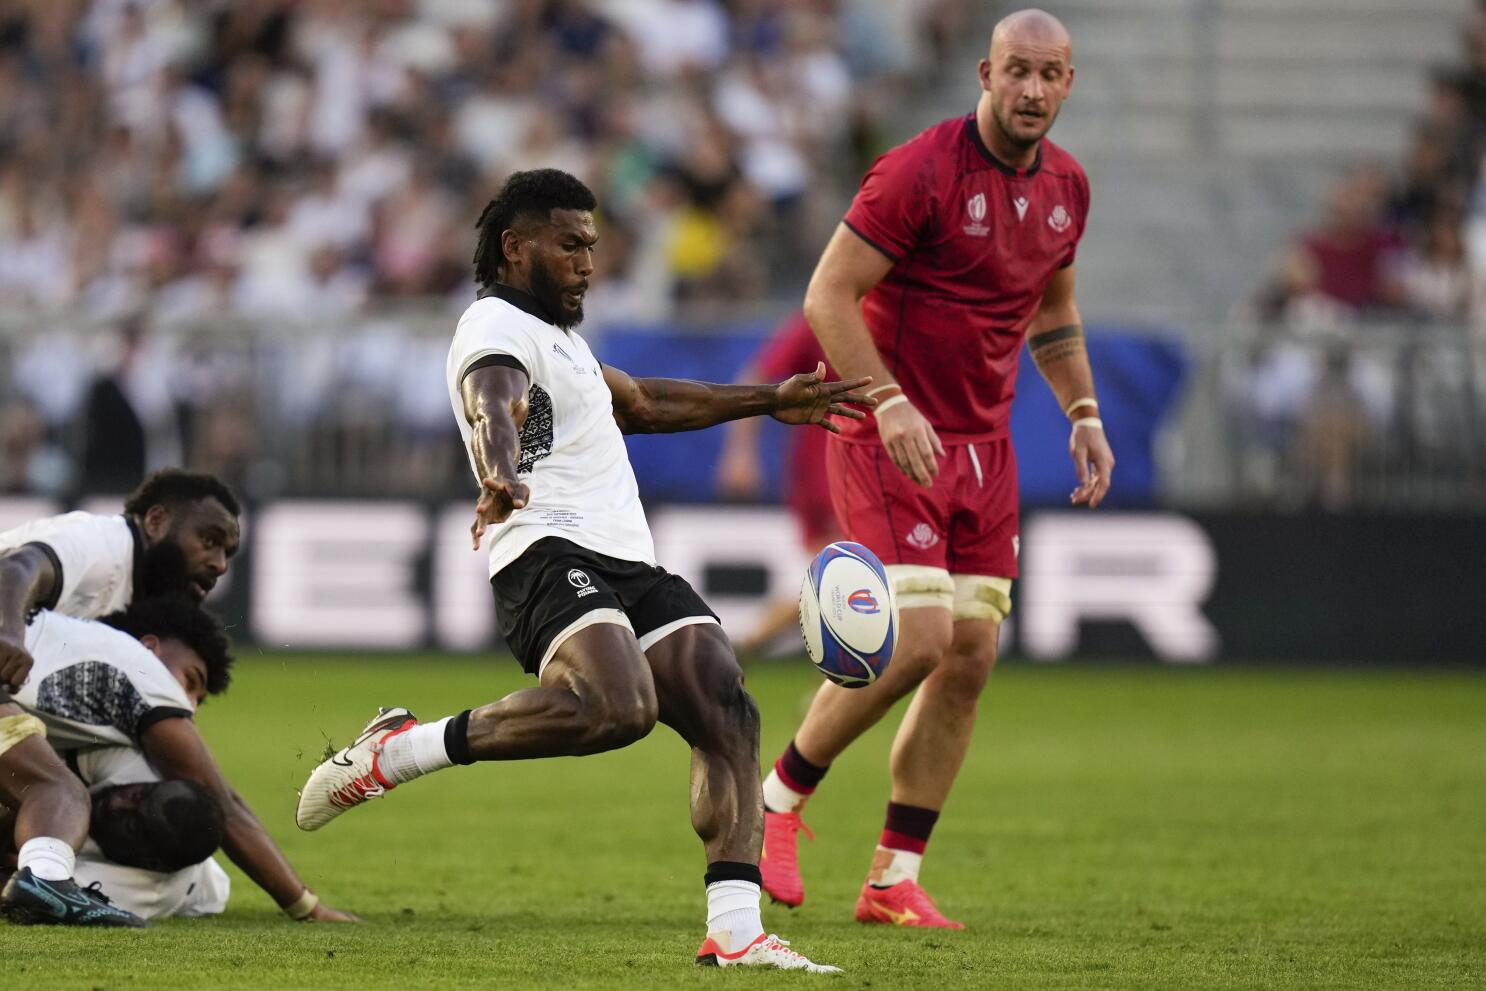 Fiji starting Botitu at 10 for decisive Rugby World Cup match. Portugal drops captain - The San Diego Union-Tribune